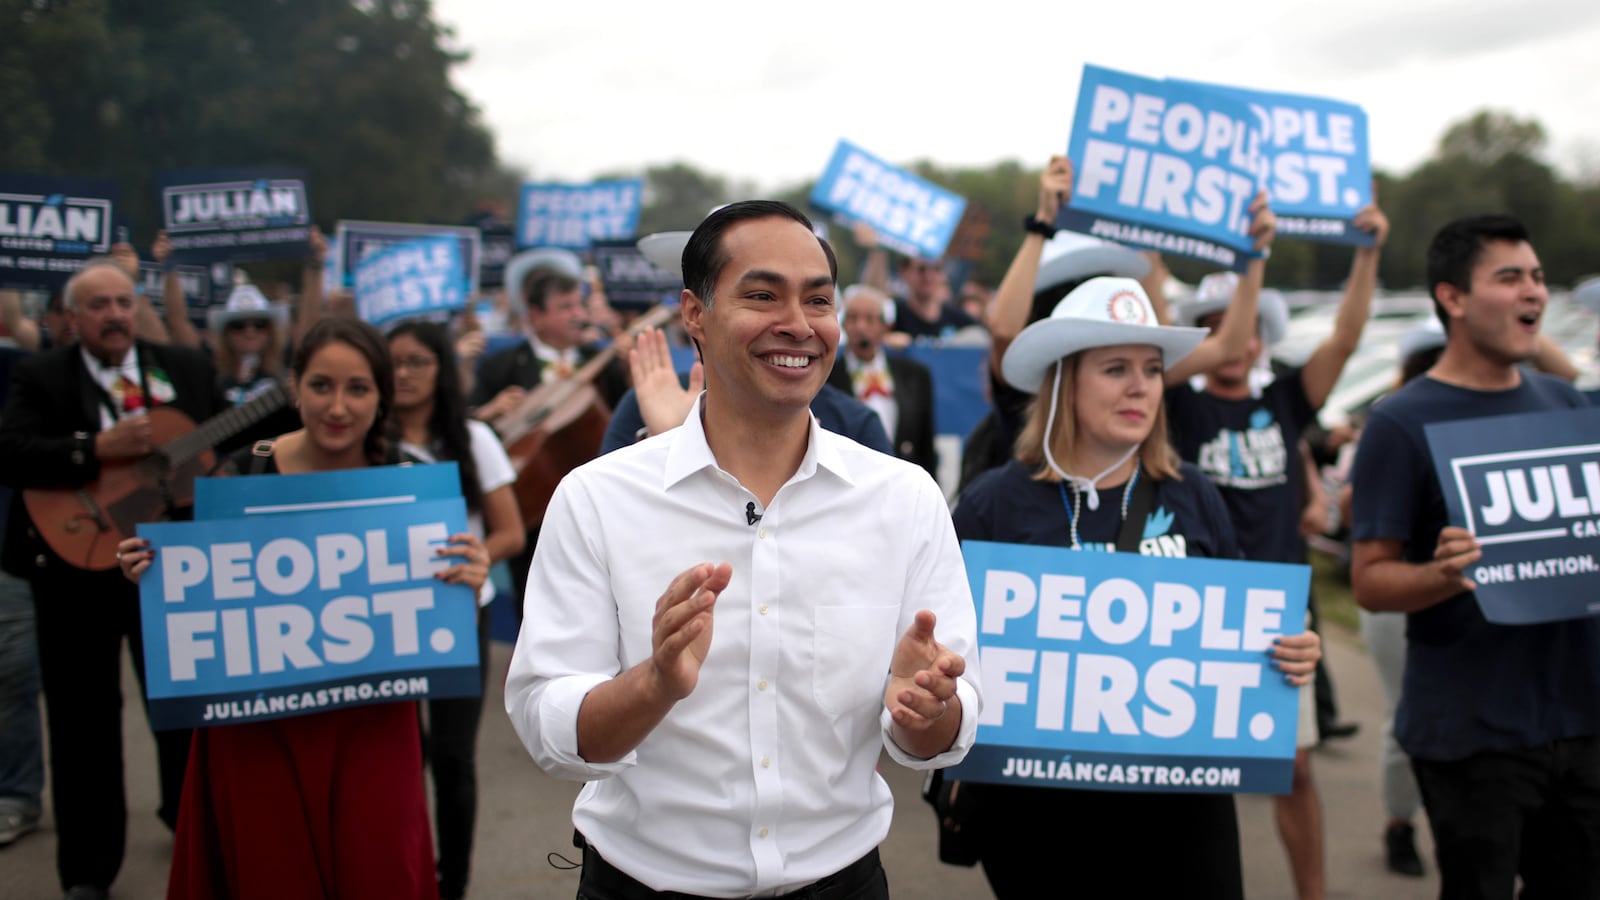 Democratic presidential candidate Julián Castro released his "People First Education" plan back in May and has been touting it this week.